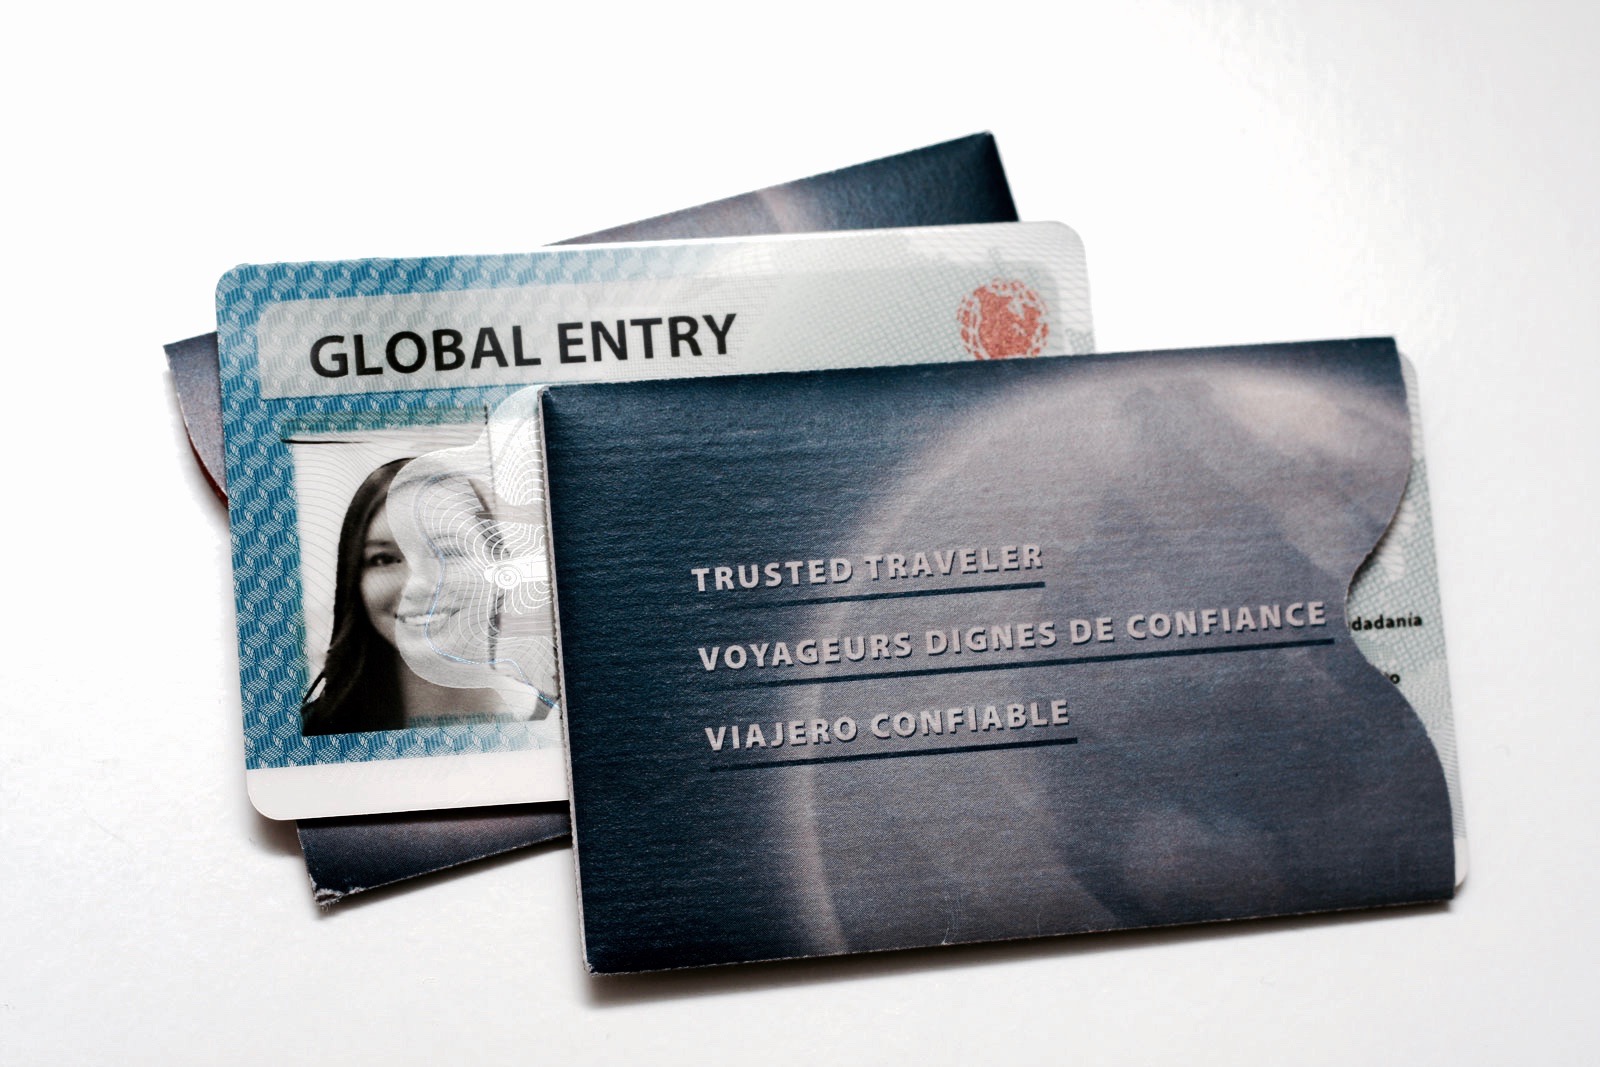 If you're in a hurry to renew your Global Entry card, you could be